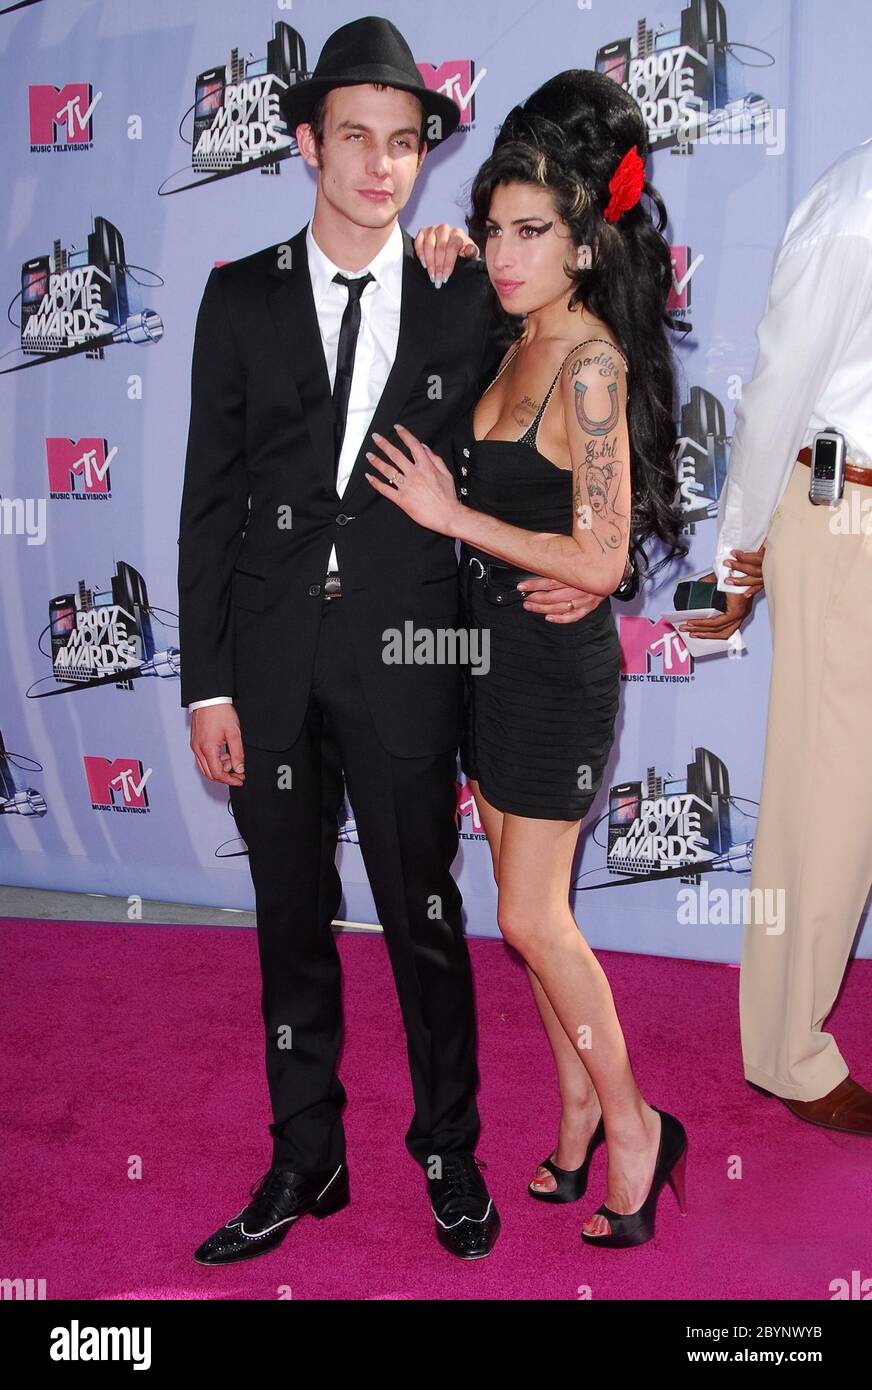 Amy Winehouse and husband Blake Fielder-Civil at the 2007 MTV Movie Awards - Arrivals held at the Gibson Amphitheater, Universal Studios Hollywood in Universal City, CA. The event took place on Sunday, June 3, 2007. Photo by: SBM / PictureLux - File Reference # 34006-6677SBMPLX Stock Photo